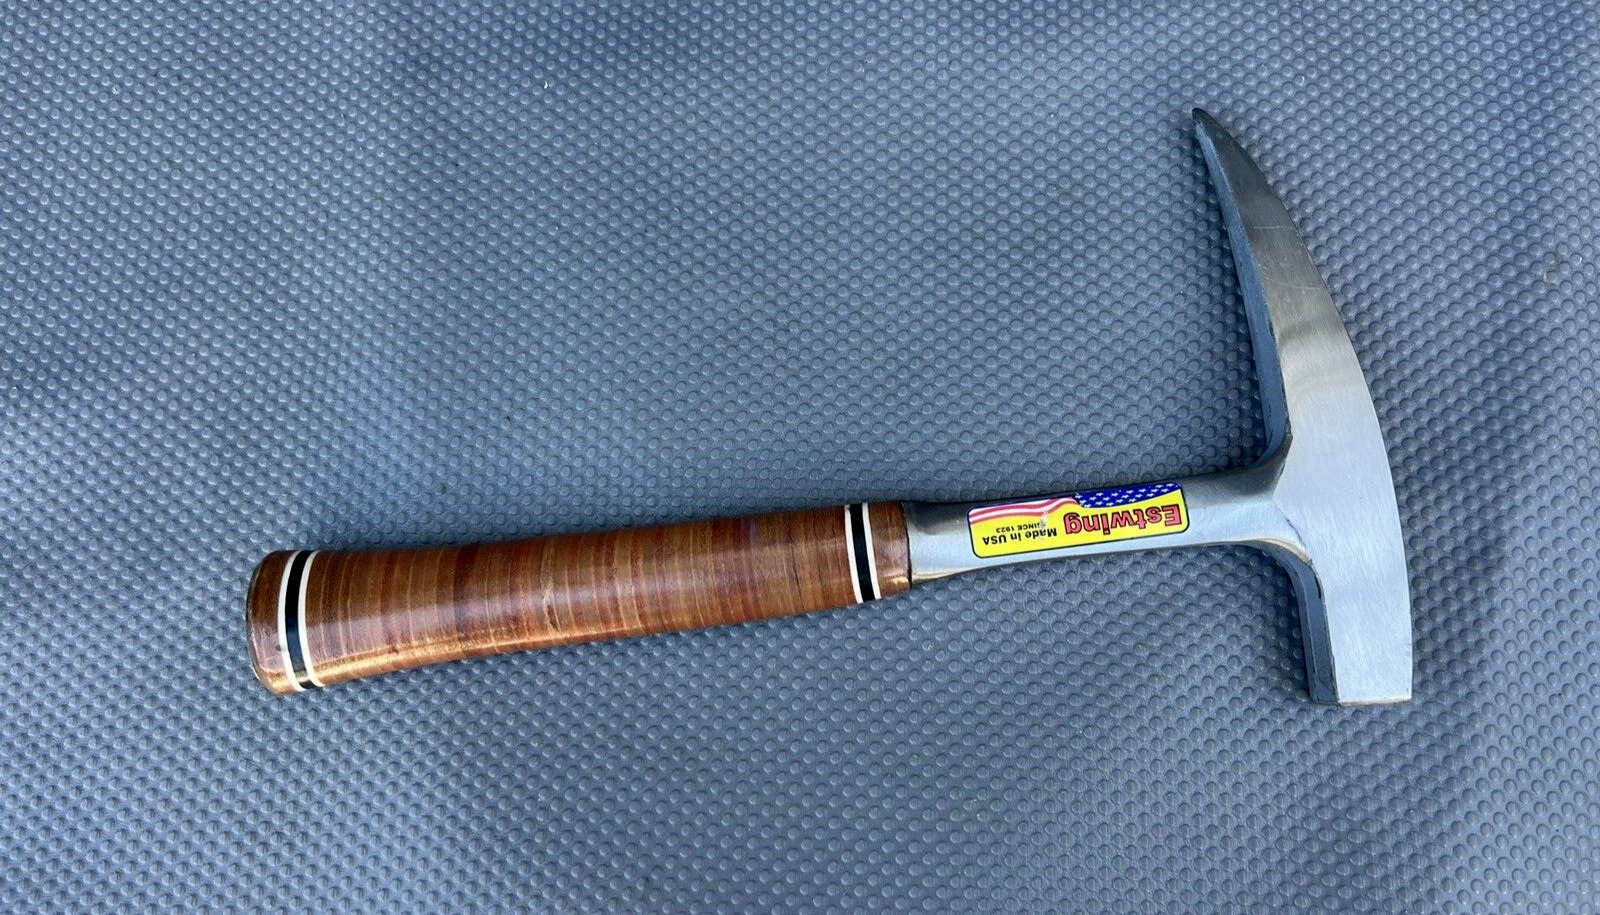 Estwing Geologist Rock Pick Hammer USA - Leather Wrap Handle